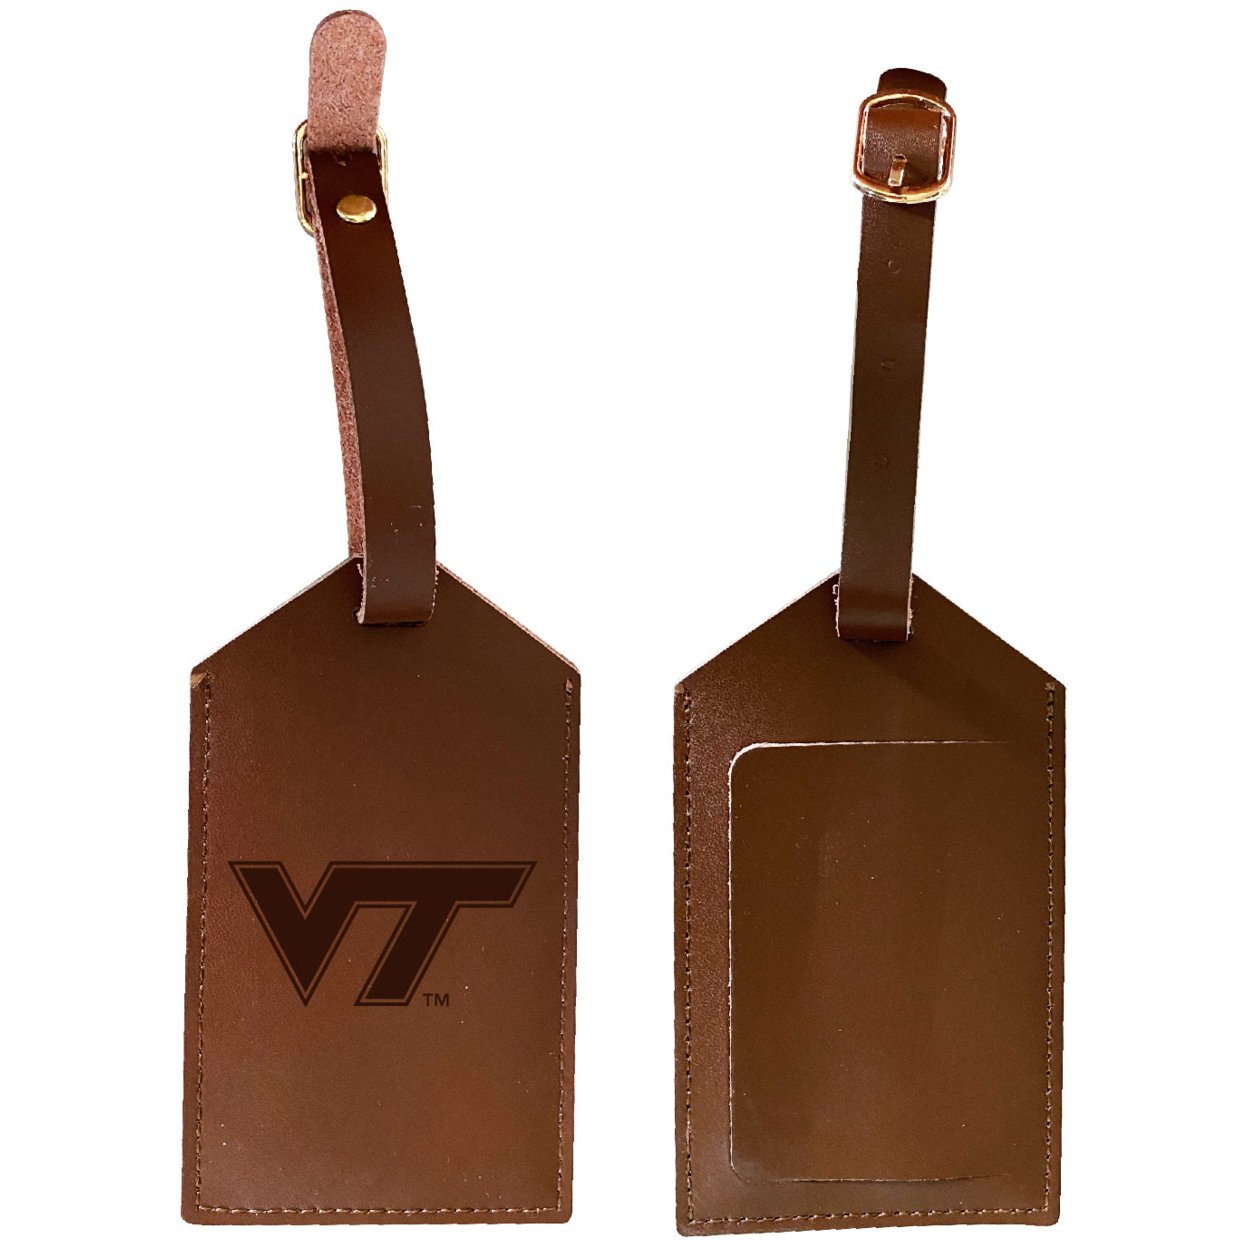 Virginia Commonwealth Leather Luggage Tag Engraved